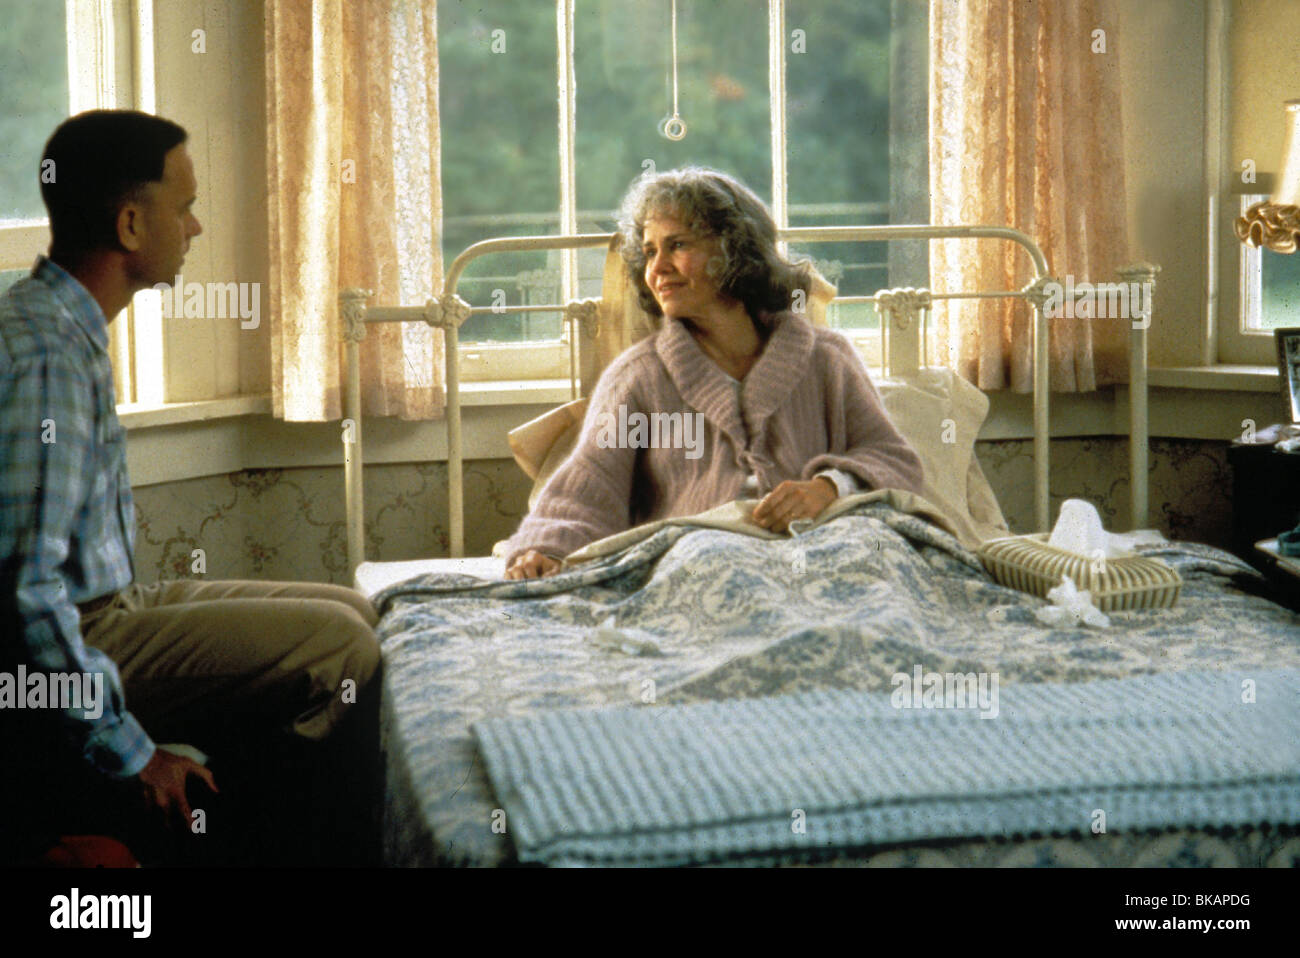 FORREST GUMP (1994) TOM HANKS, SALLY FIELD FORG 048 MOVIESTORE COLLECTION LTD Foto Stock